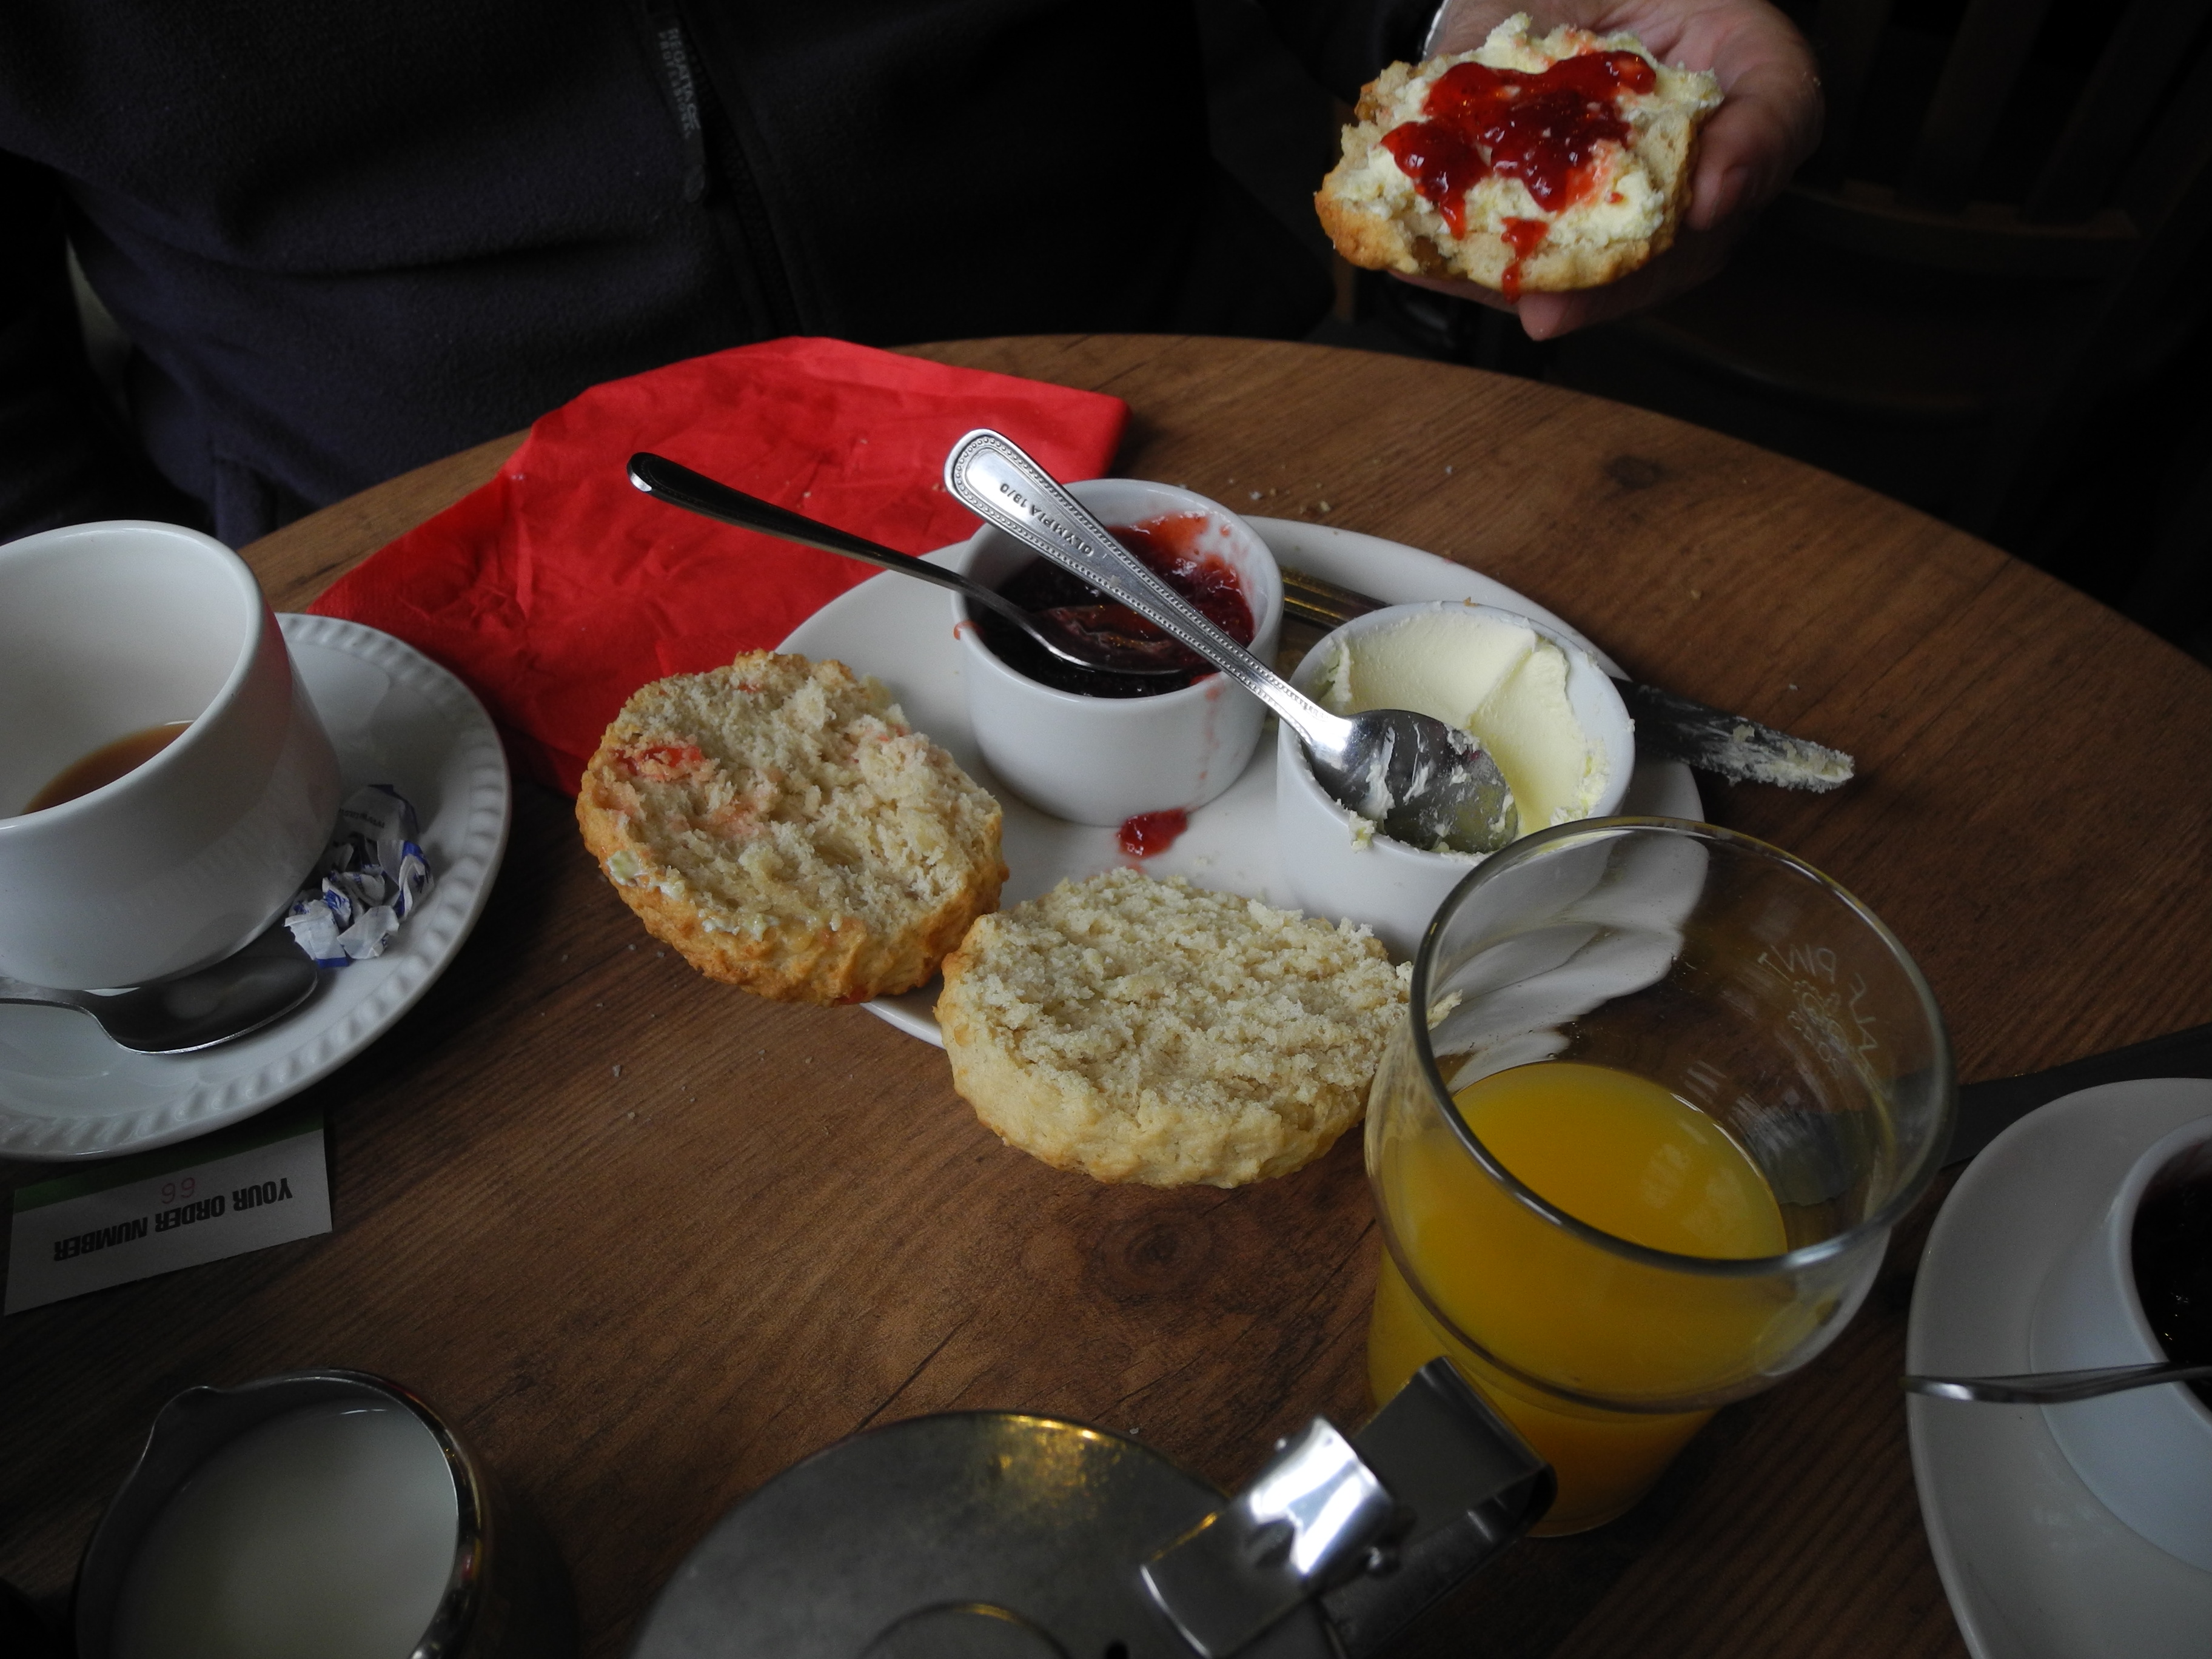 Cream Tea at the Fox Café in Princetown, located close to the infamous Dartmoor prison.
Dartmoor is a region of the county of Devon in the UK.